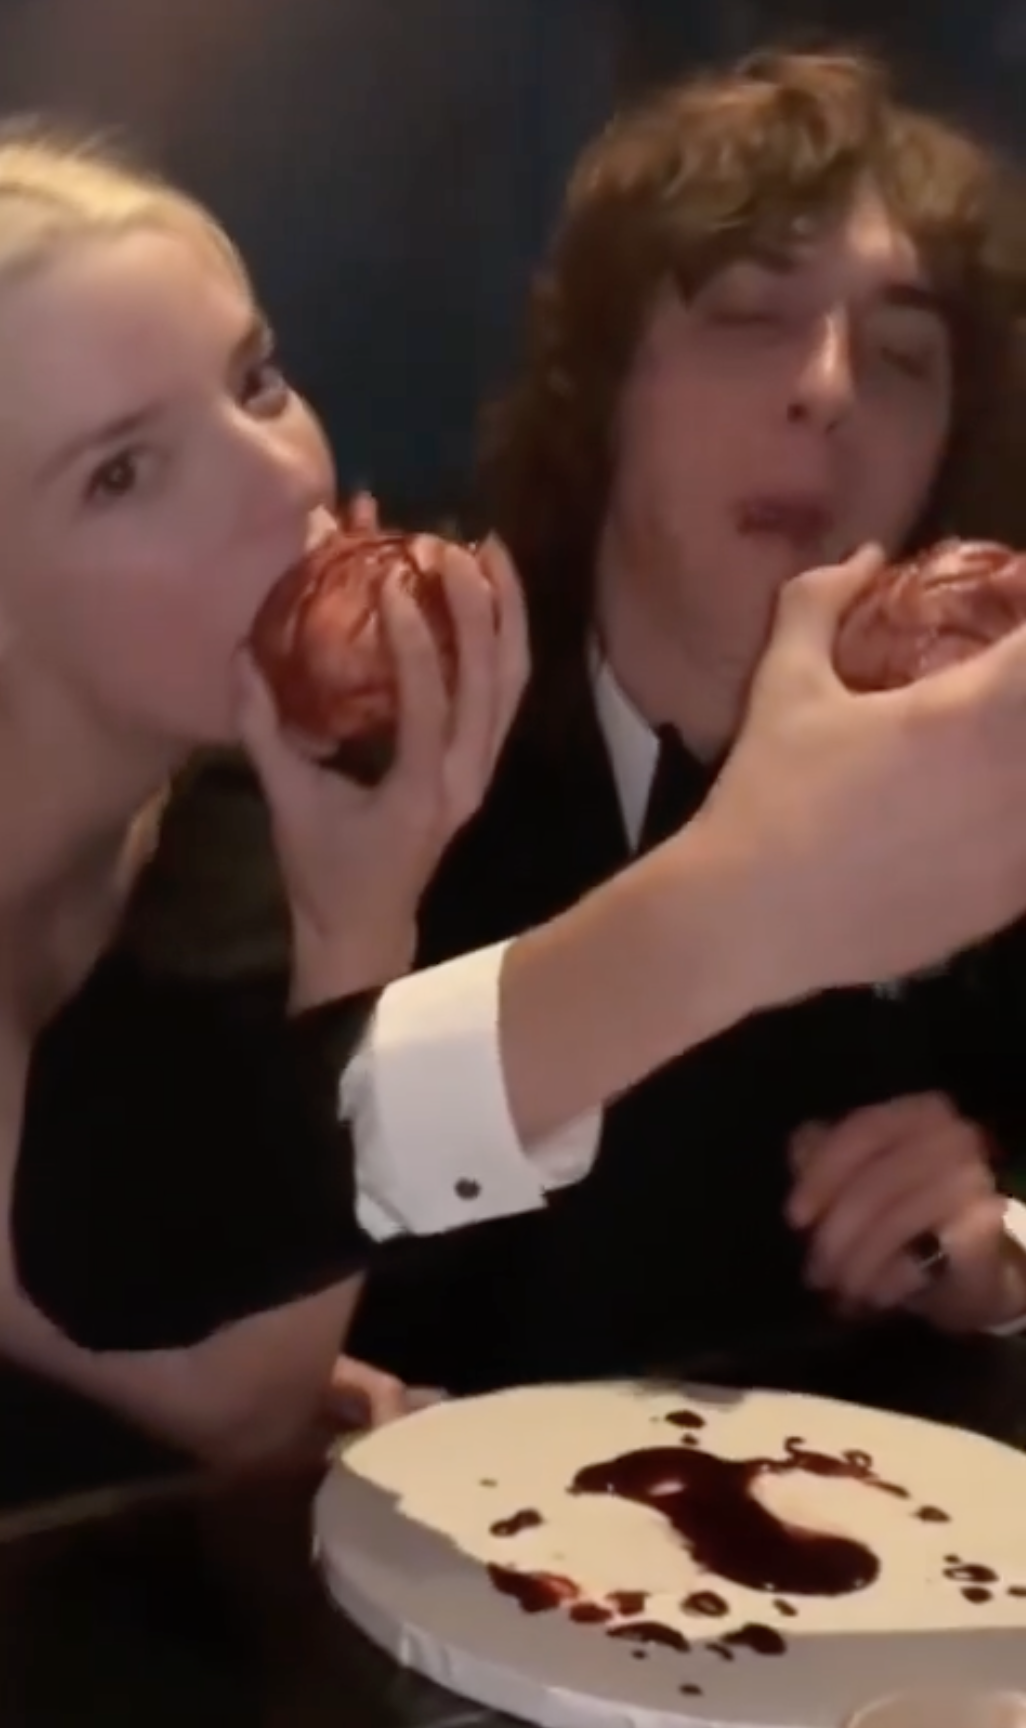 Two individuals playfully taking a bite from the same apple